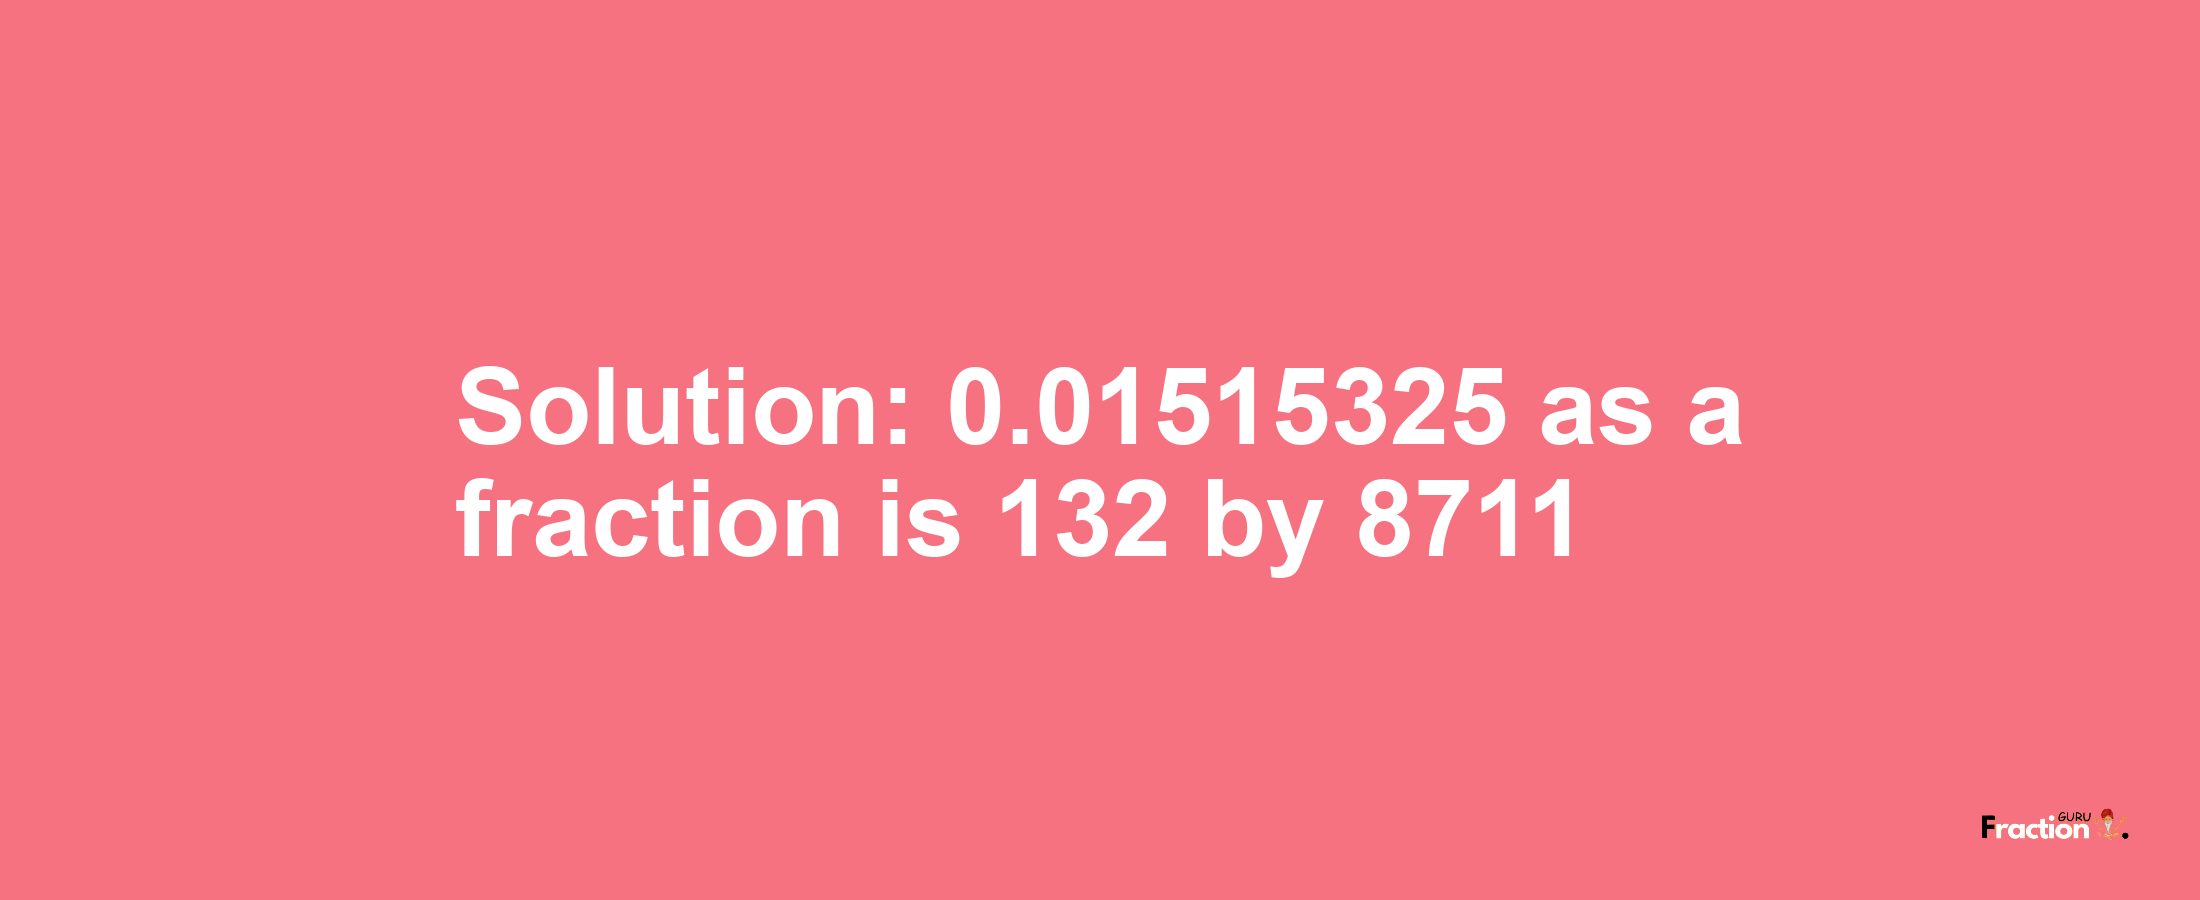 Solution:0.01515325 as a fraction is 132/8711